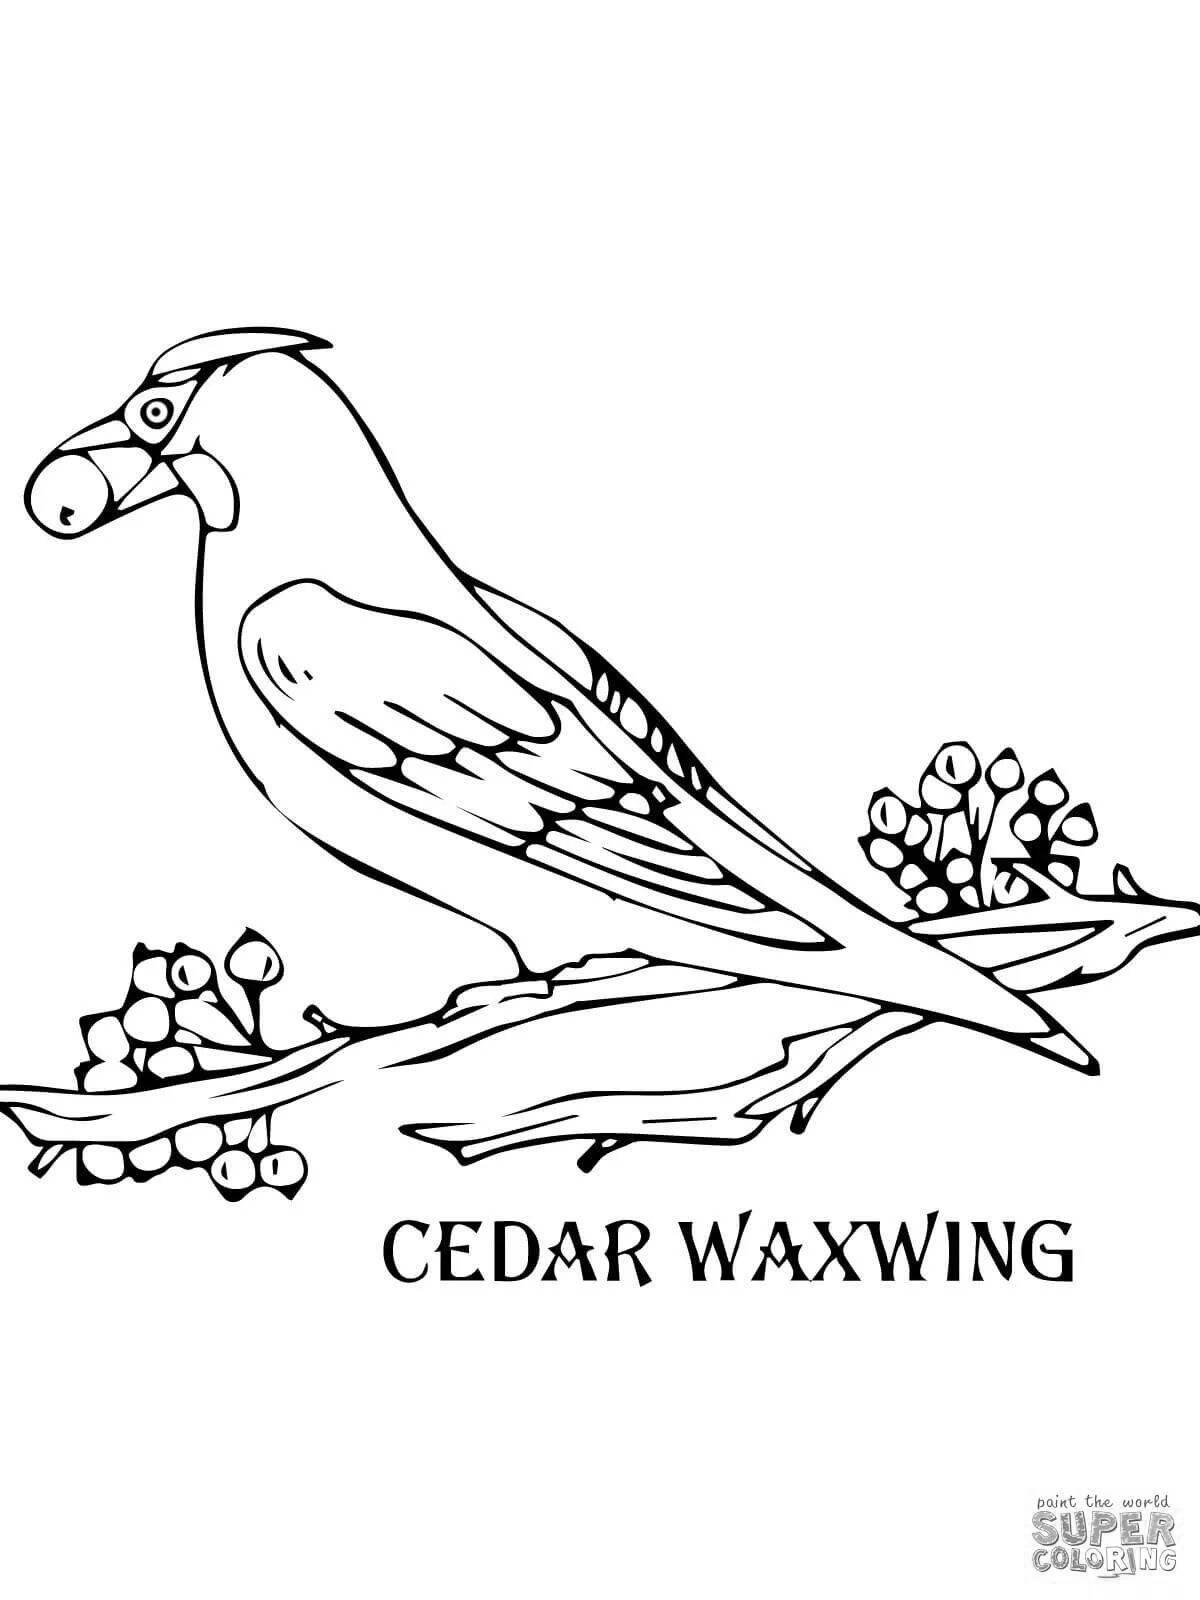 Coloring waxwing for children